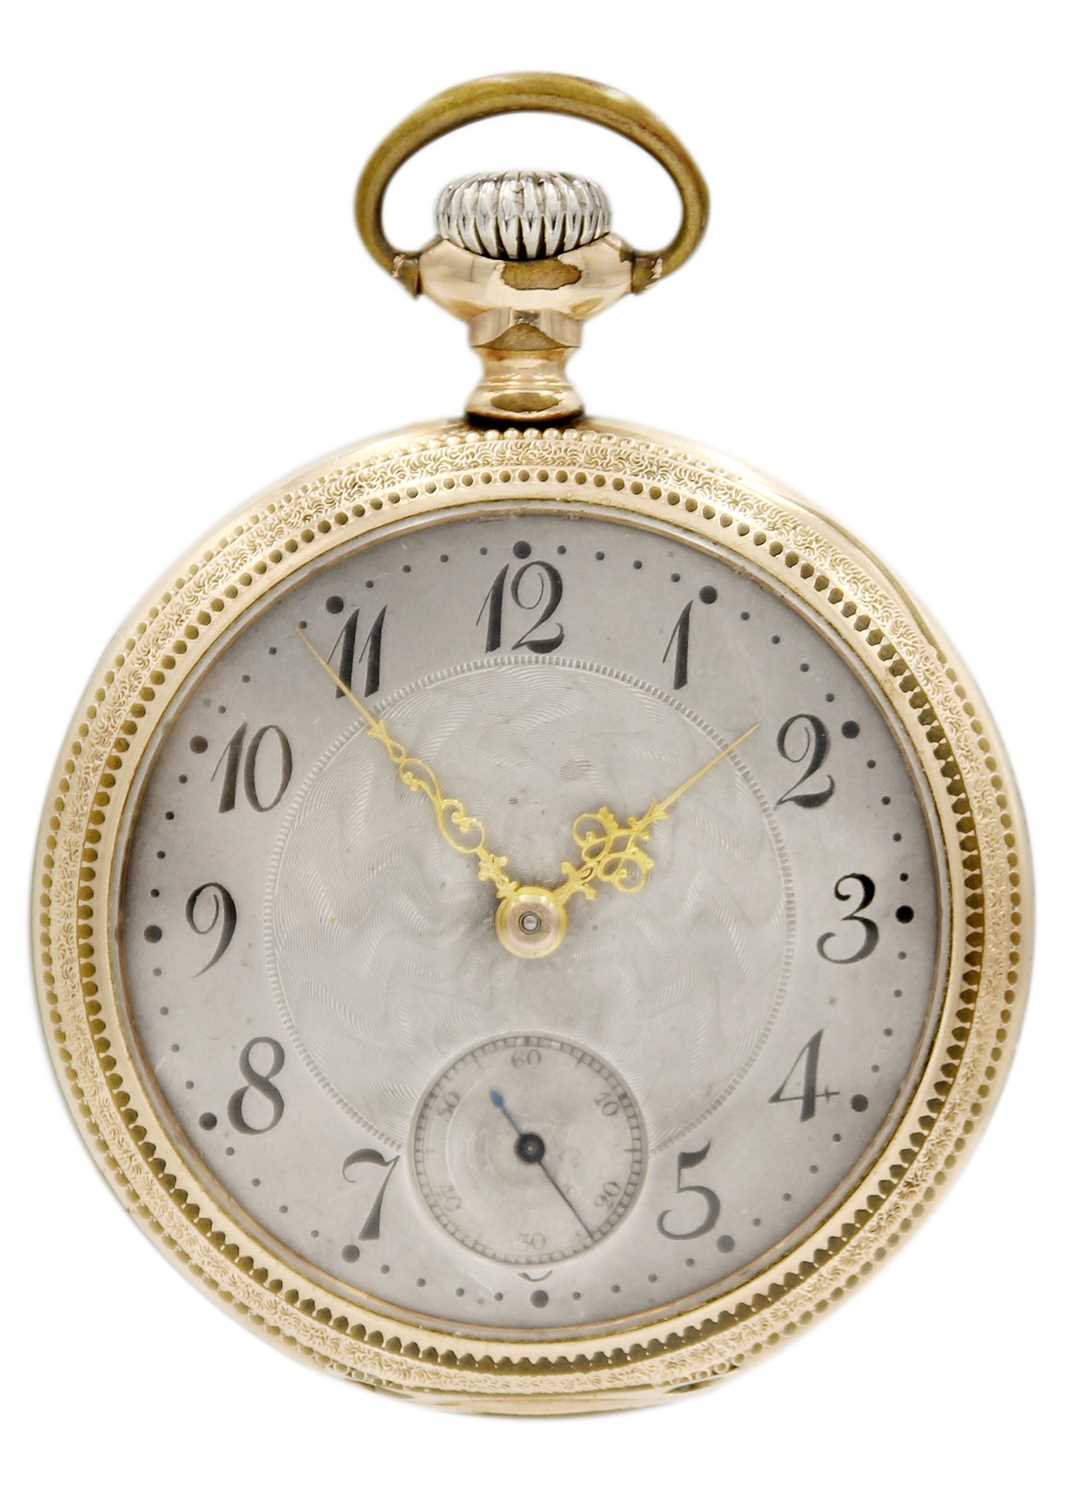 WALTHAM - A rose gold plated crown wind open face pocket watch.